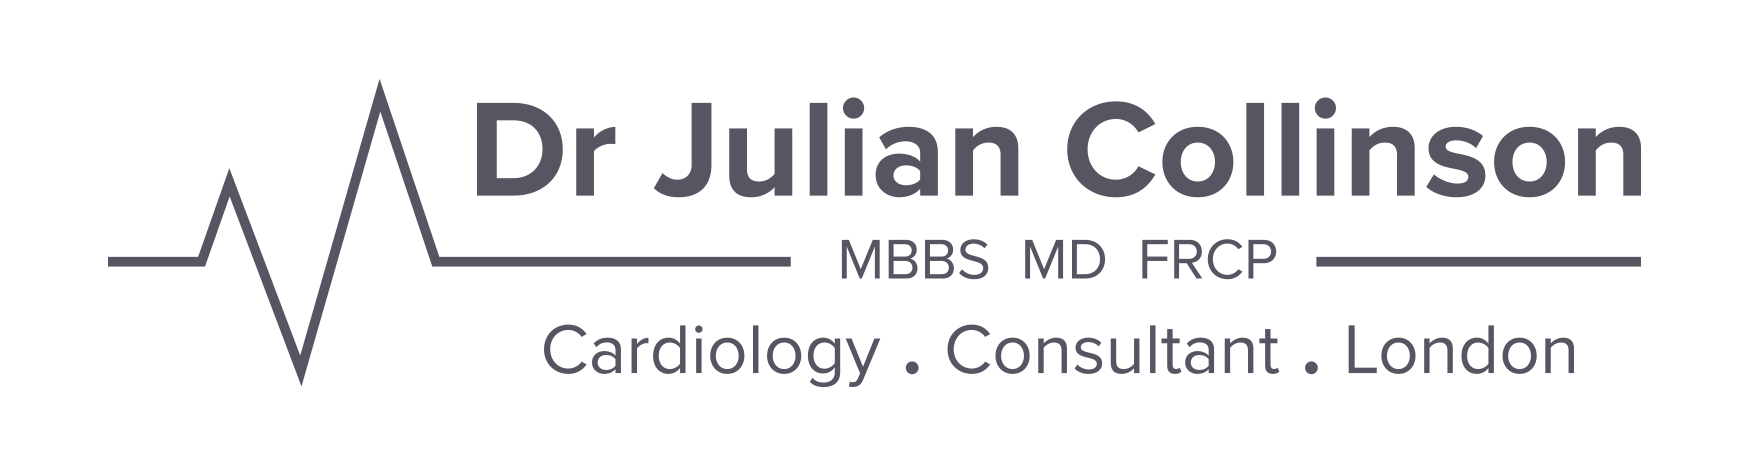 Cardiology Consultant London